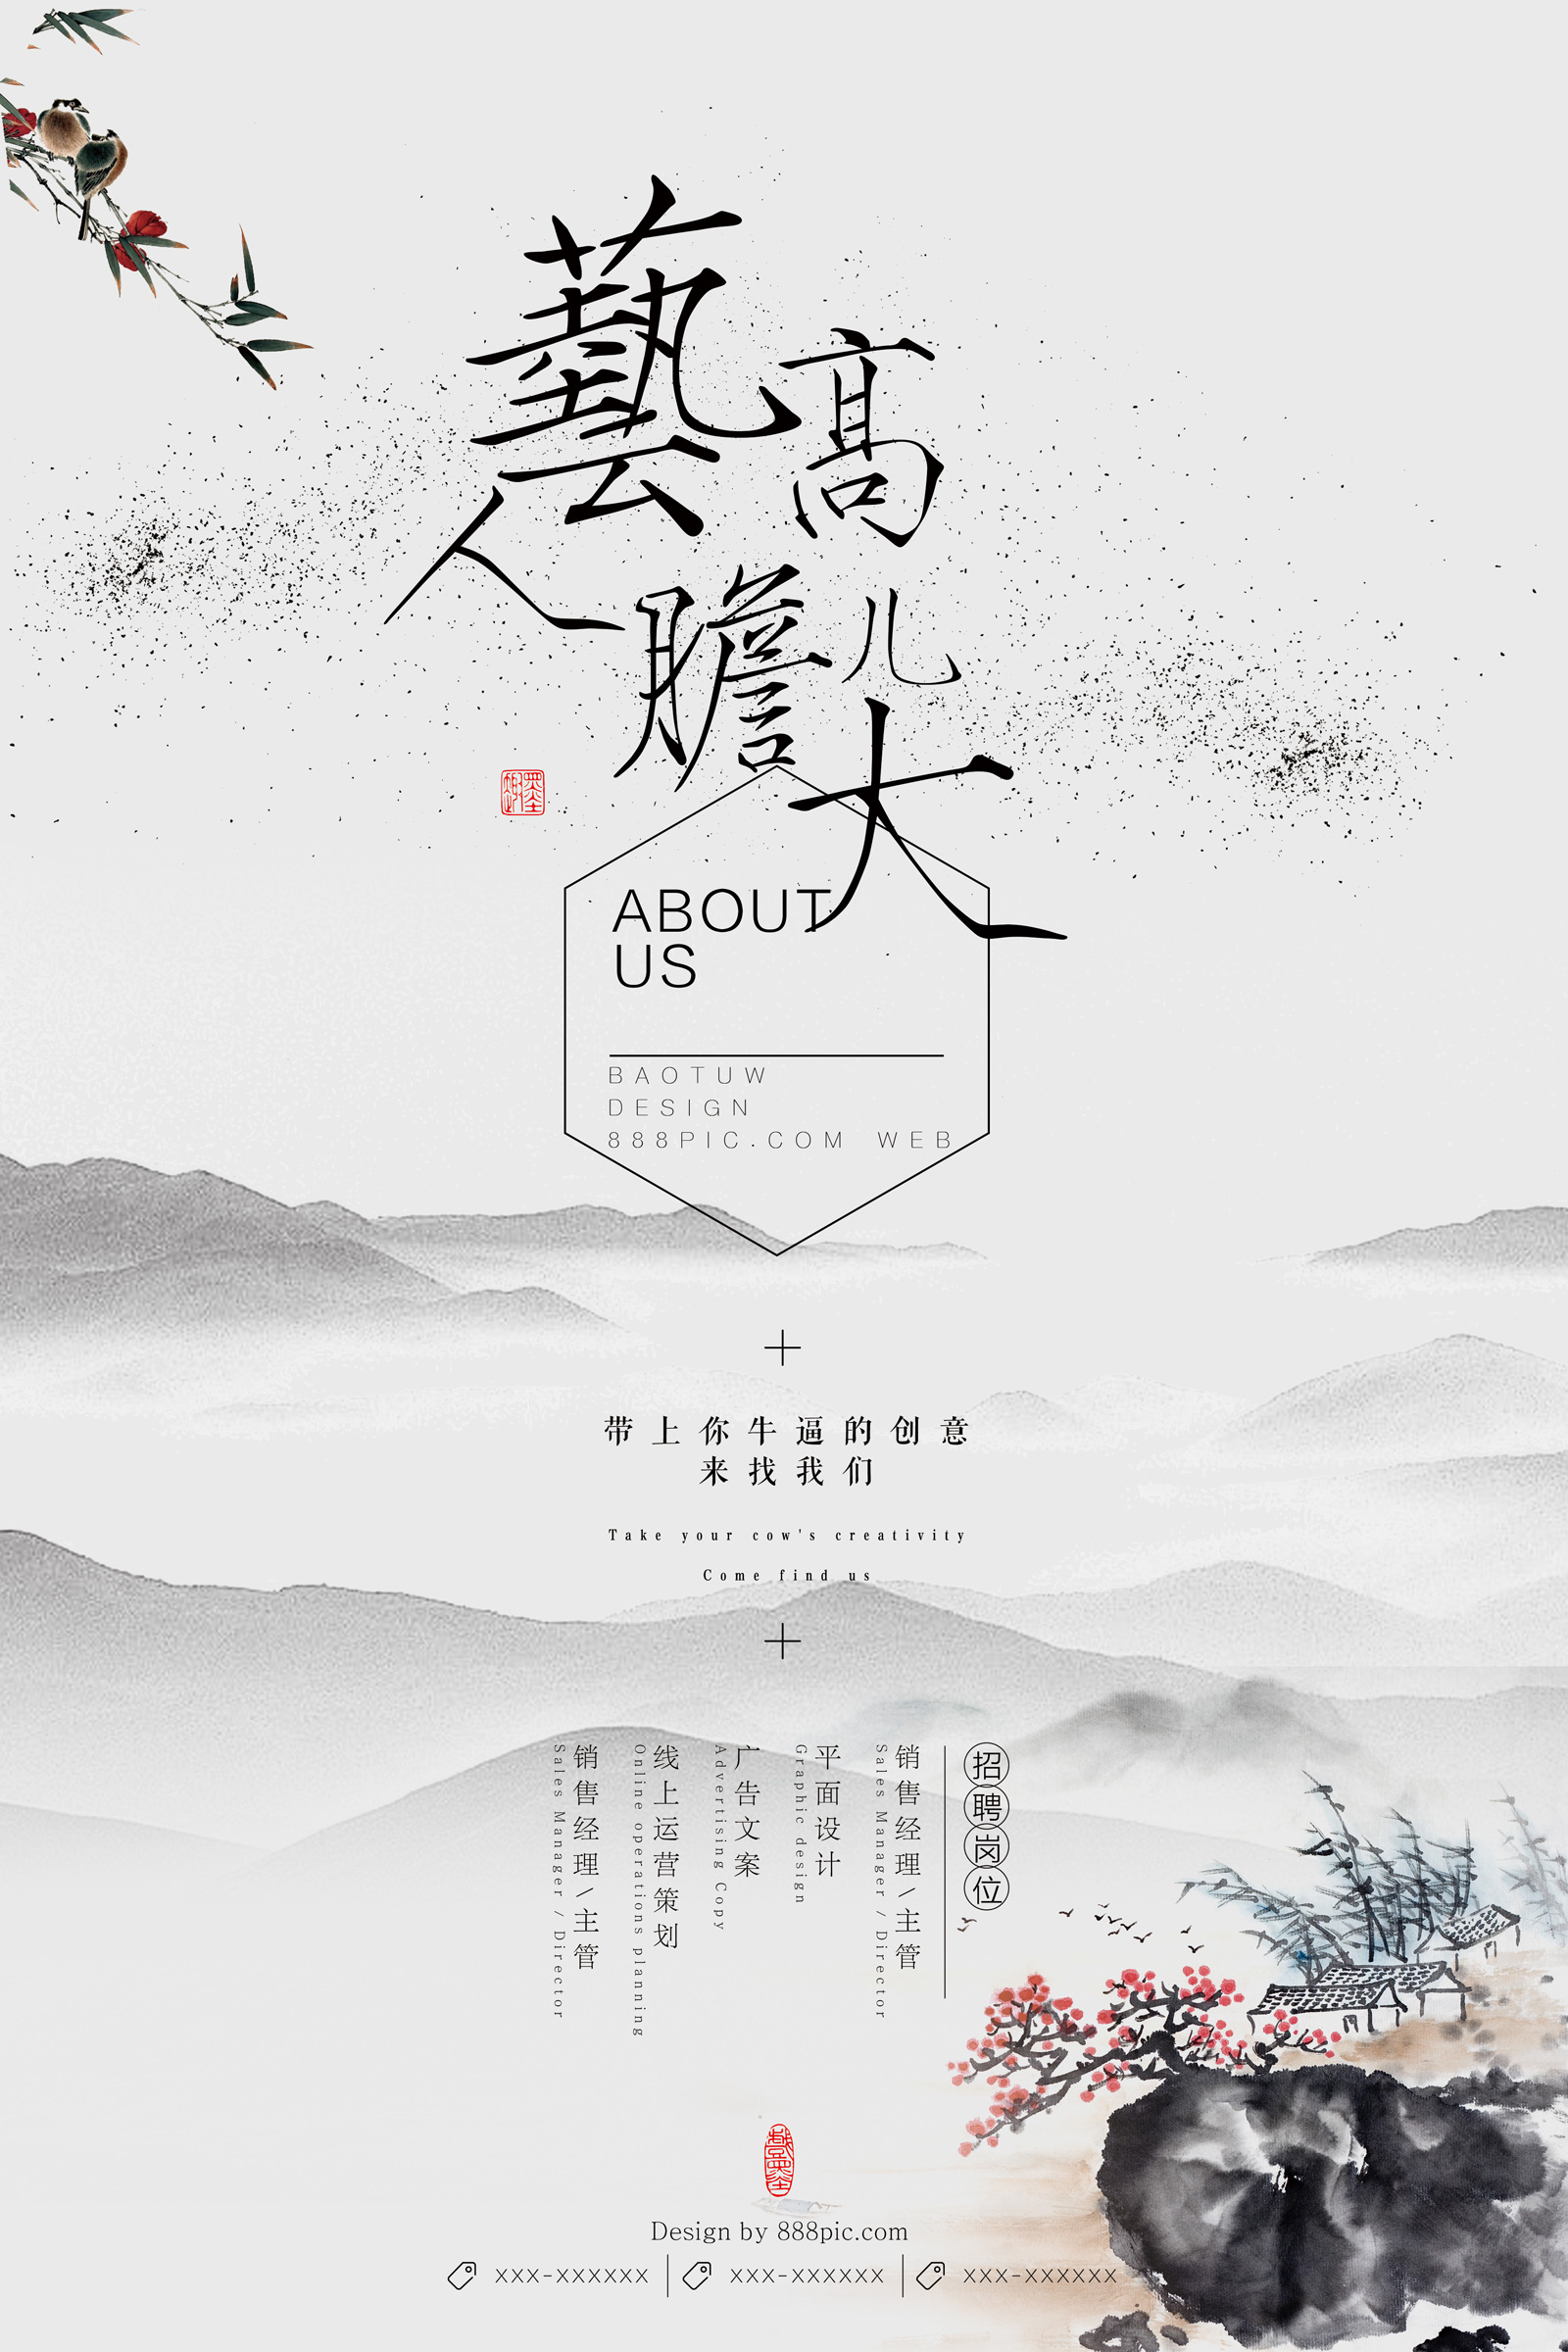 Minimalist Chinese Traditional Style Business Recruitment Poster Showcase PSD File Free Download